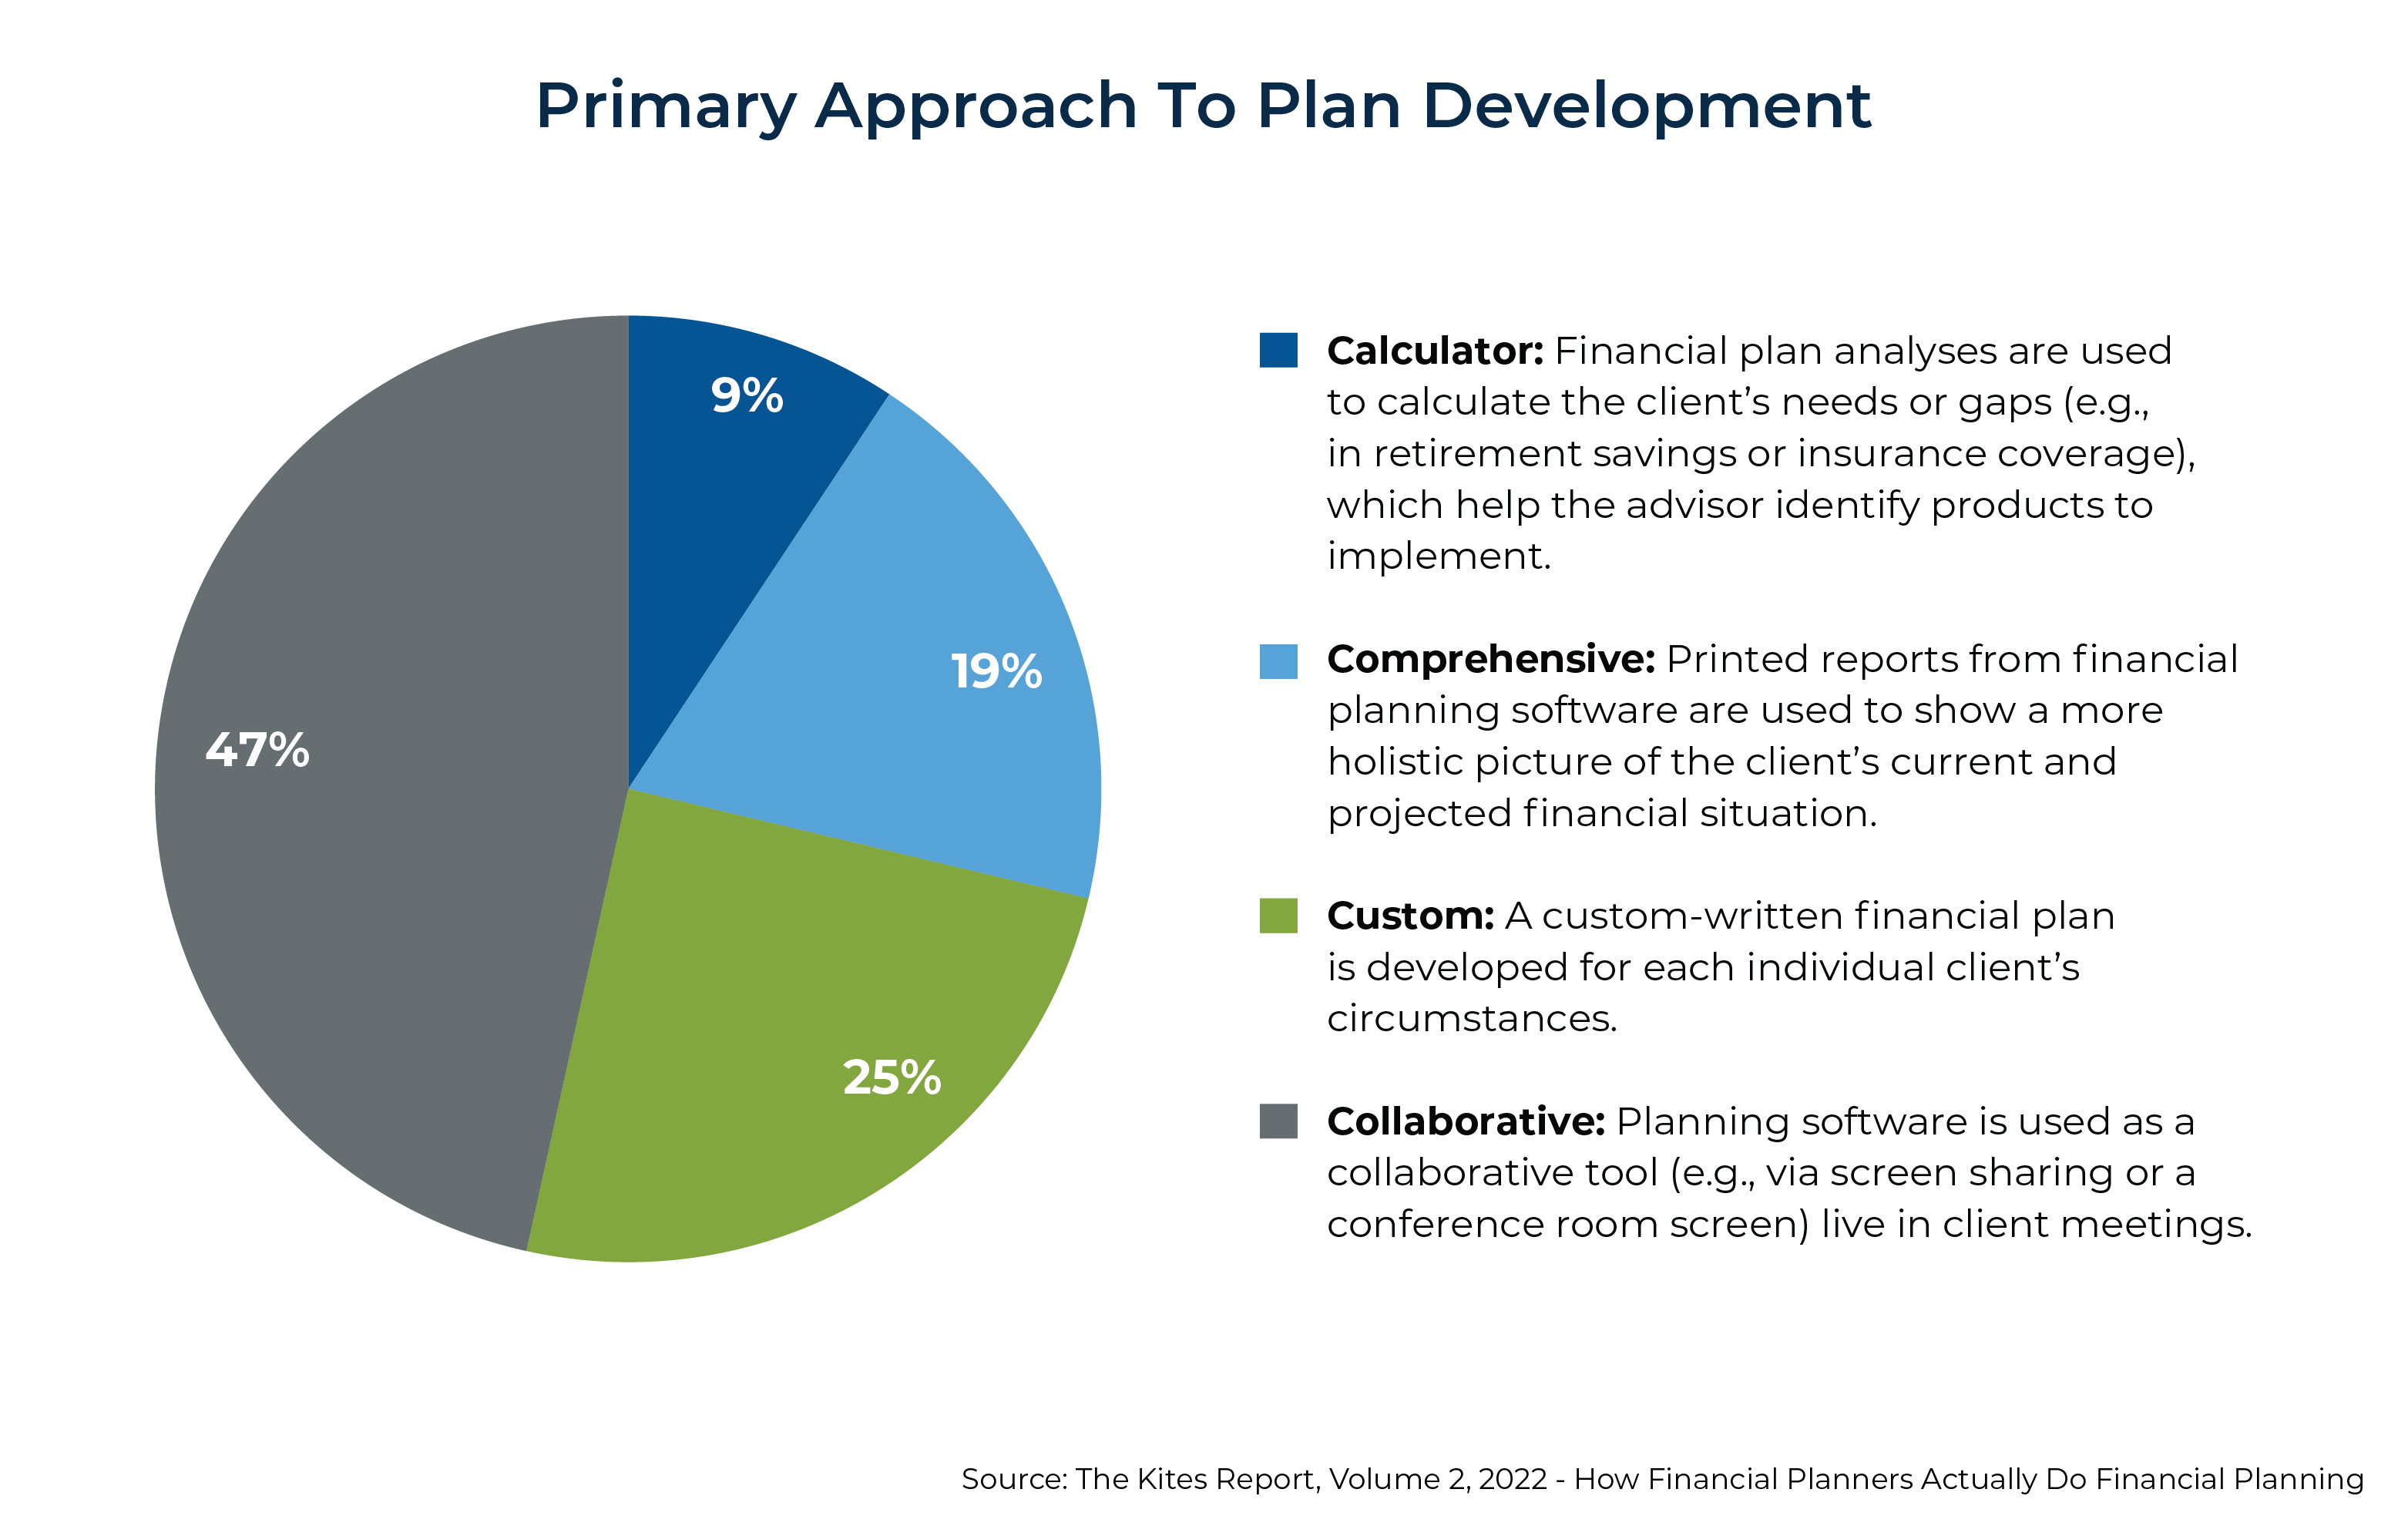 Primary Approach To Plan Development